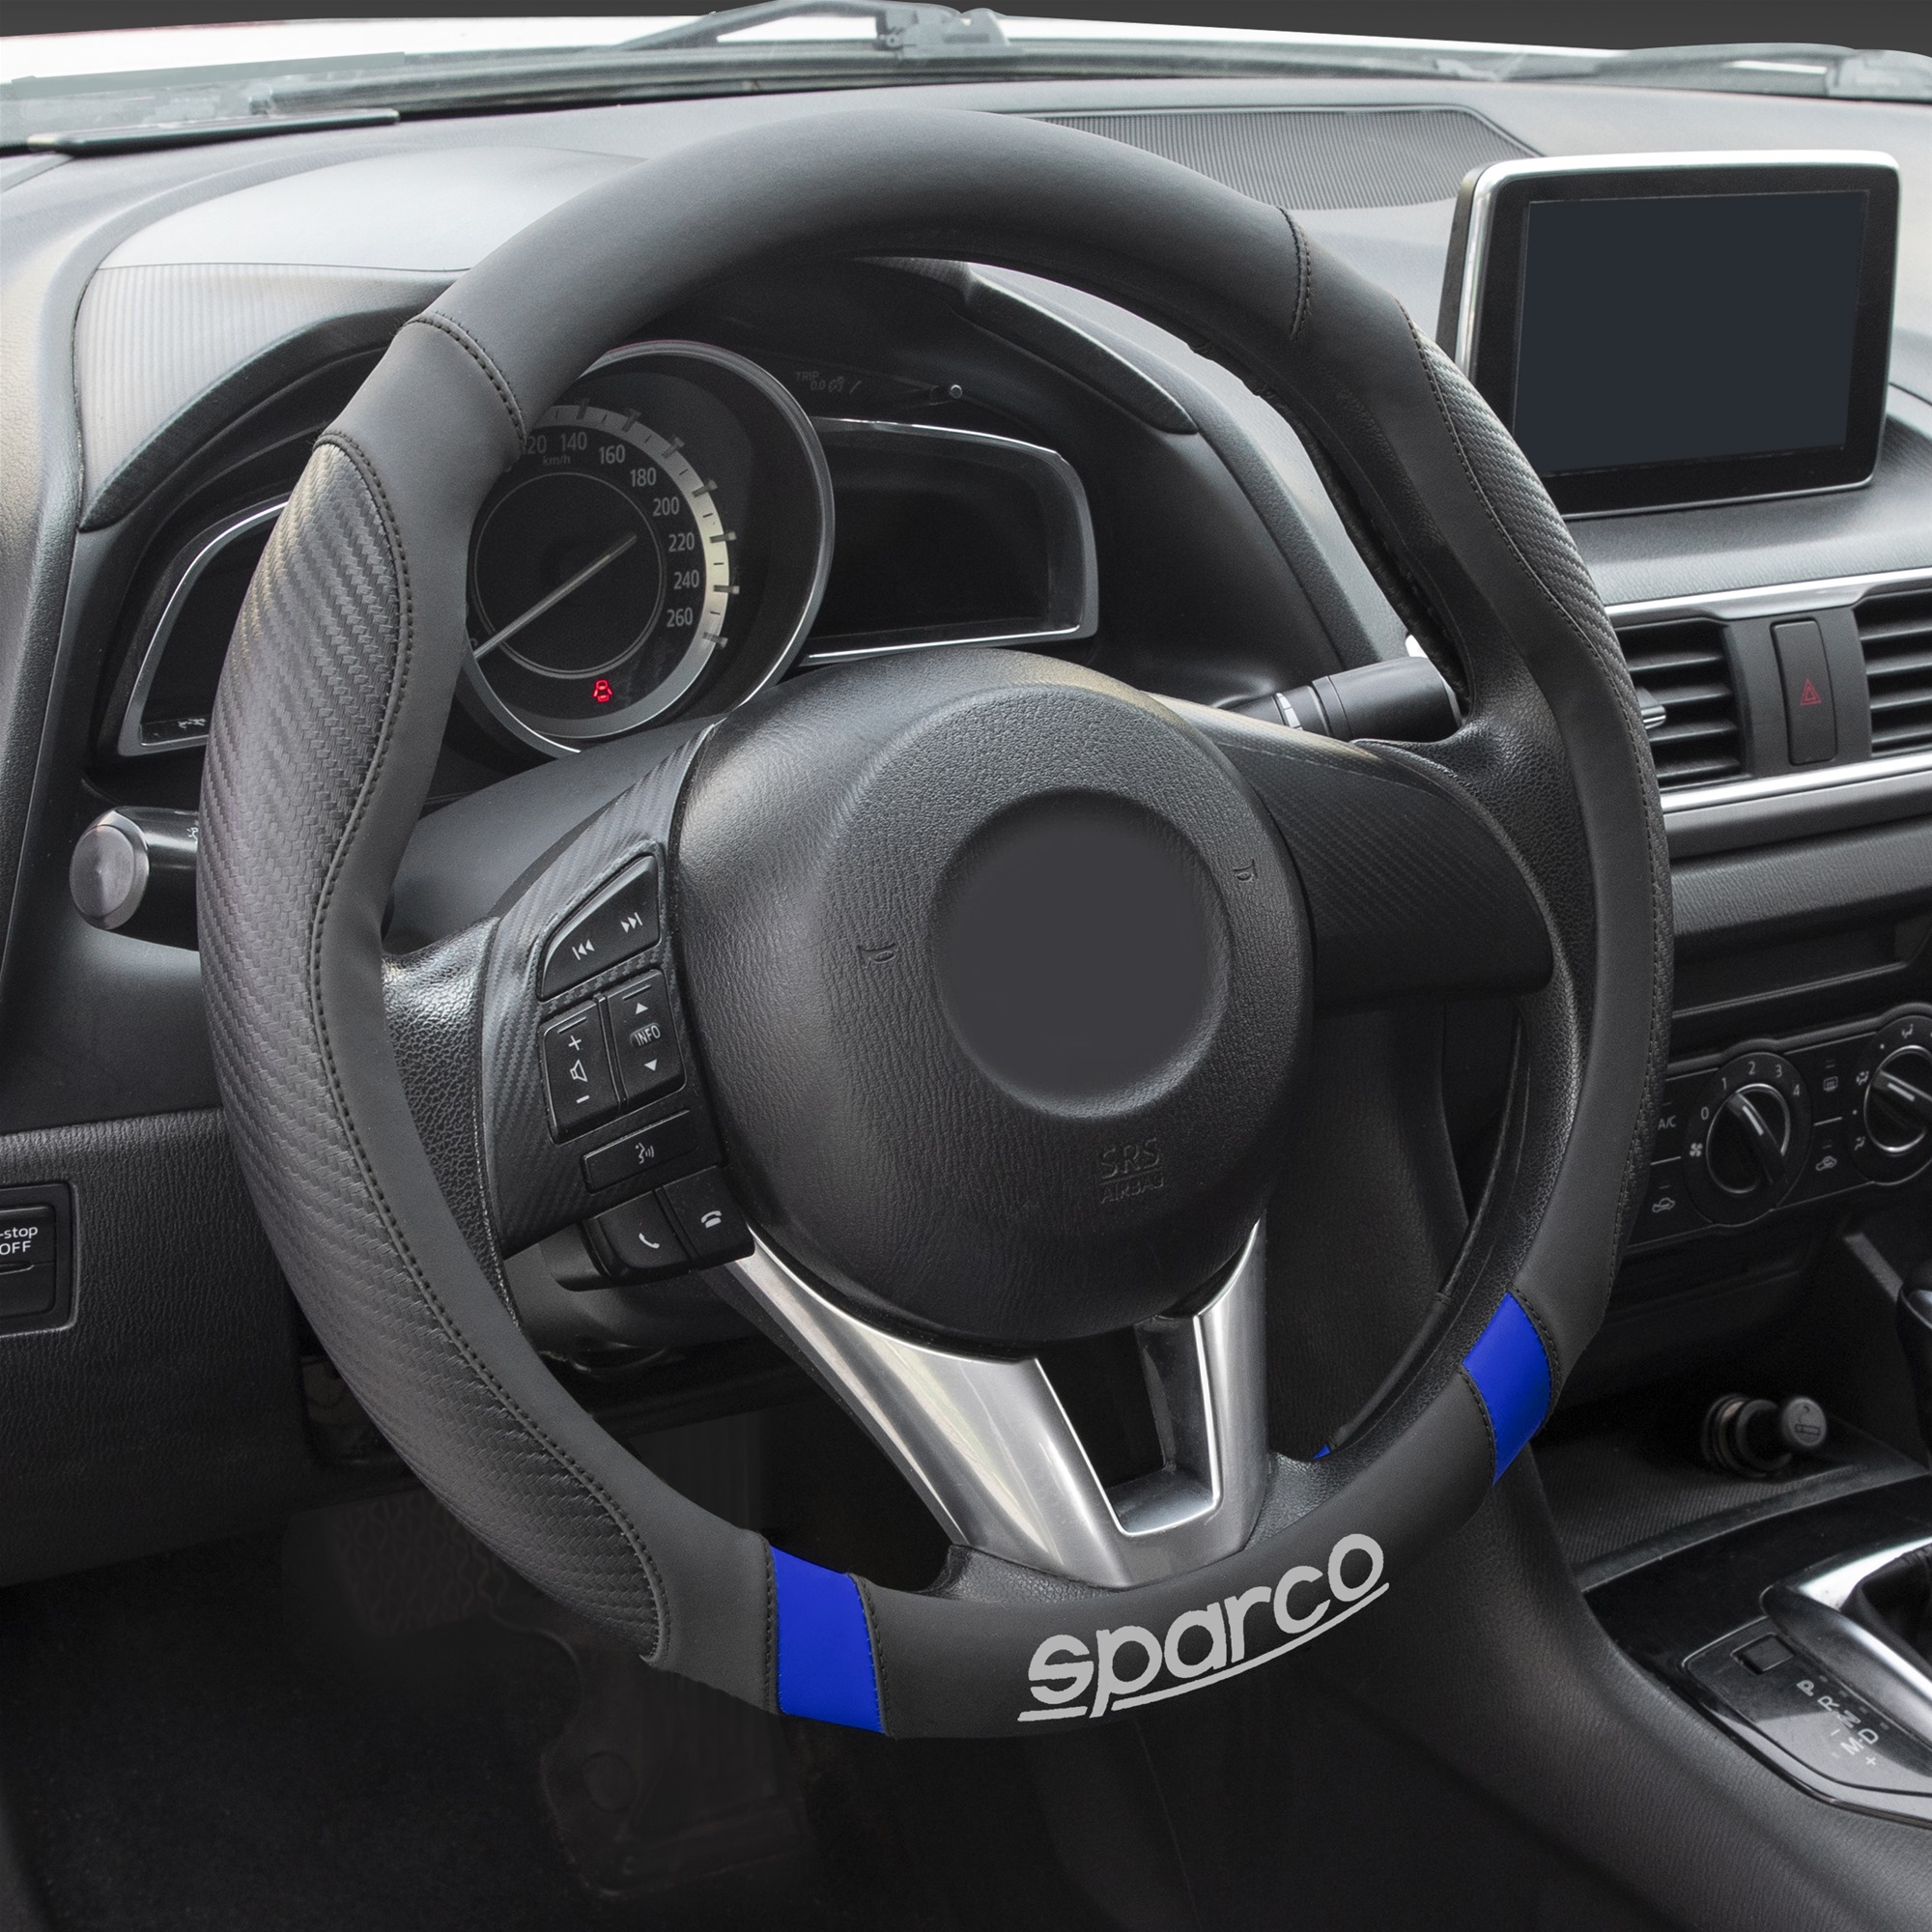 Synthetic Steering Wheel Cover blue 1pc Sparco